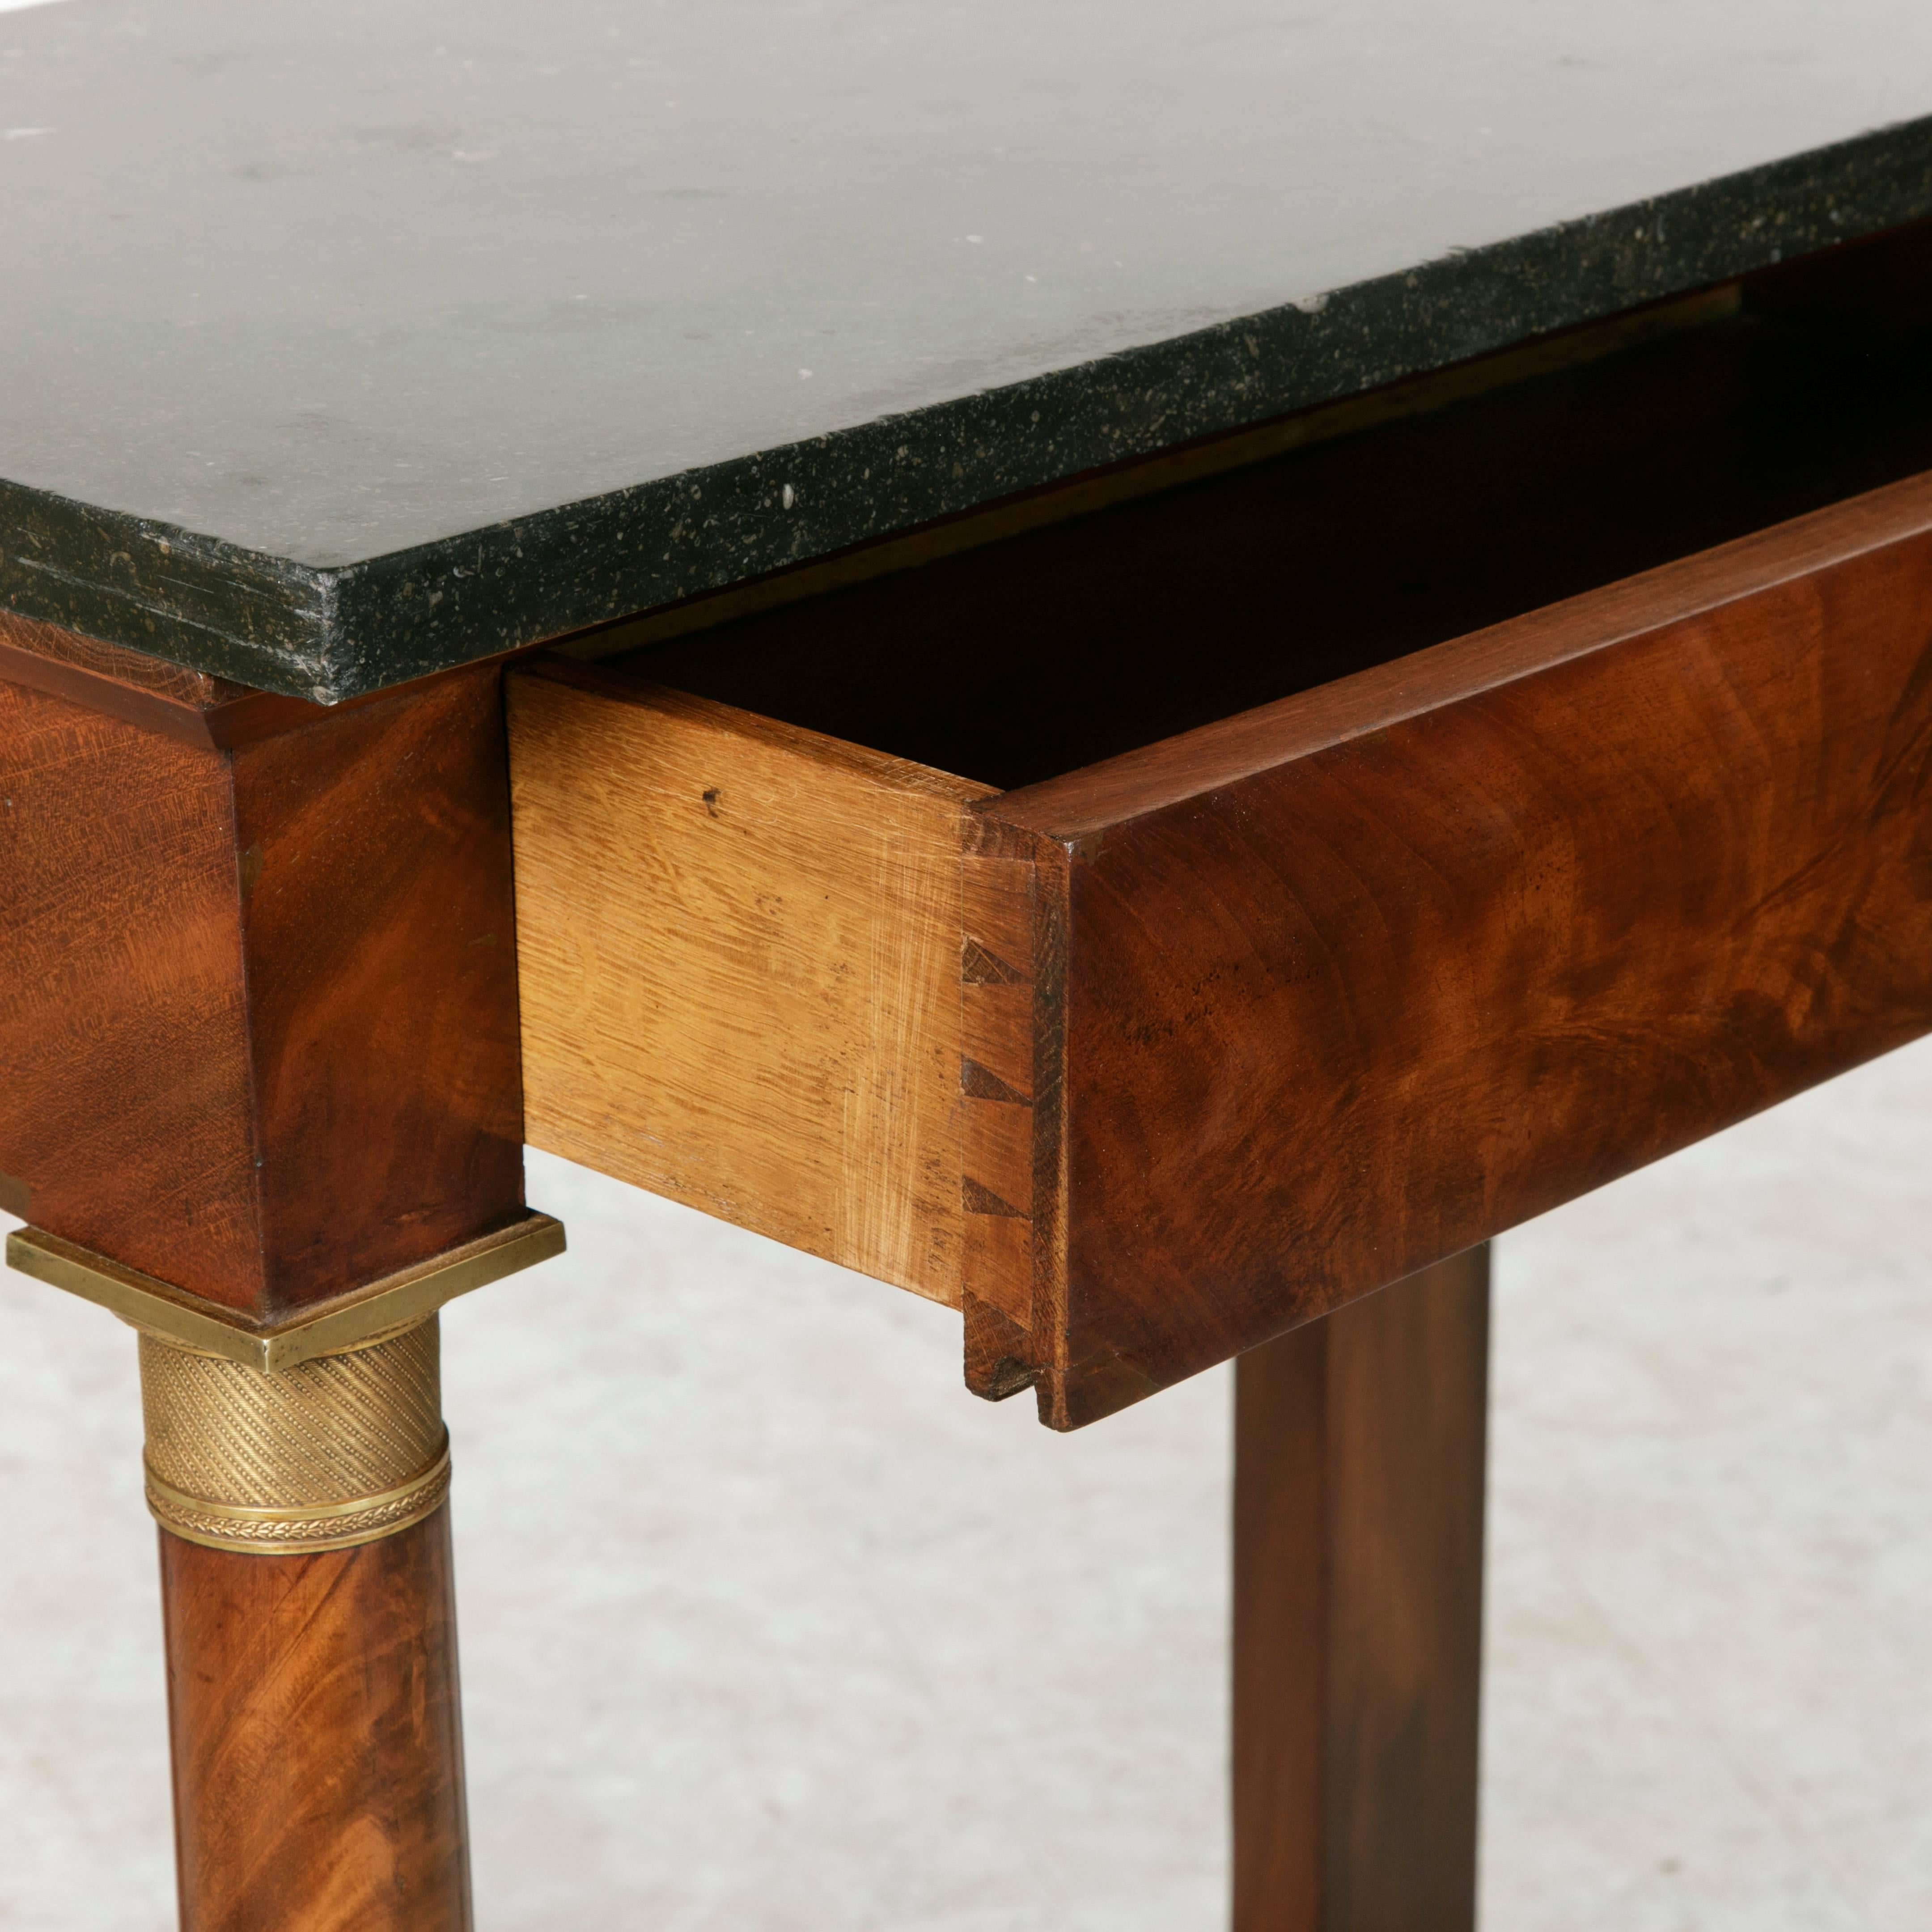 Period Empire Flamed Mahogany Console Table with Columns and Black Marble In Excellent Condition In Fayetteville, AR